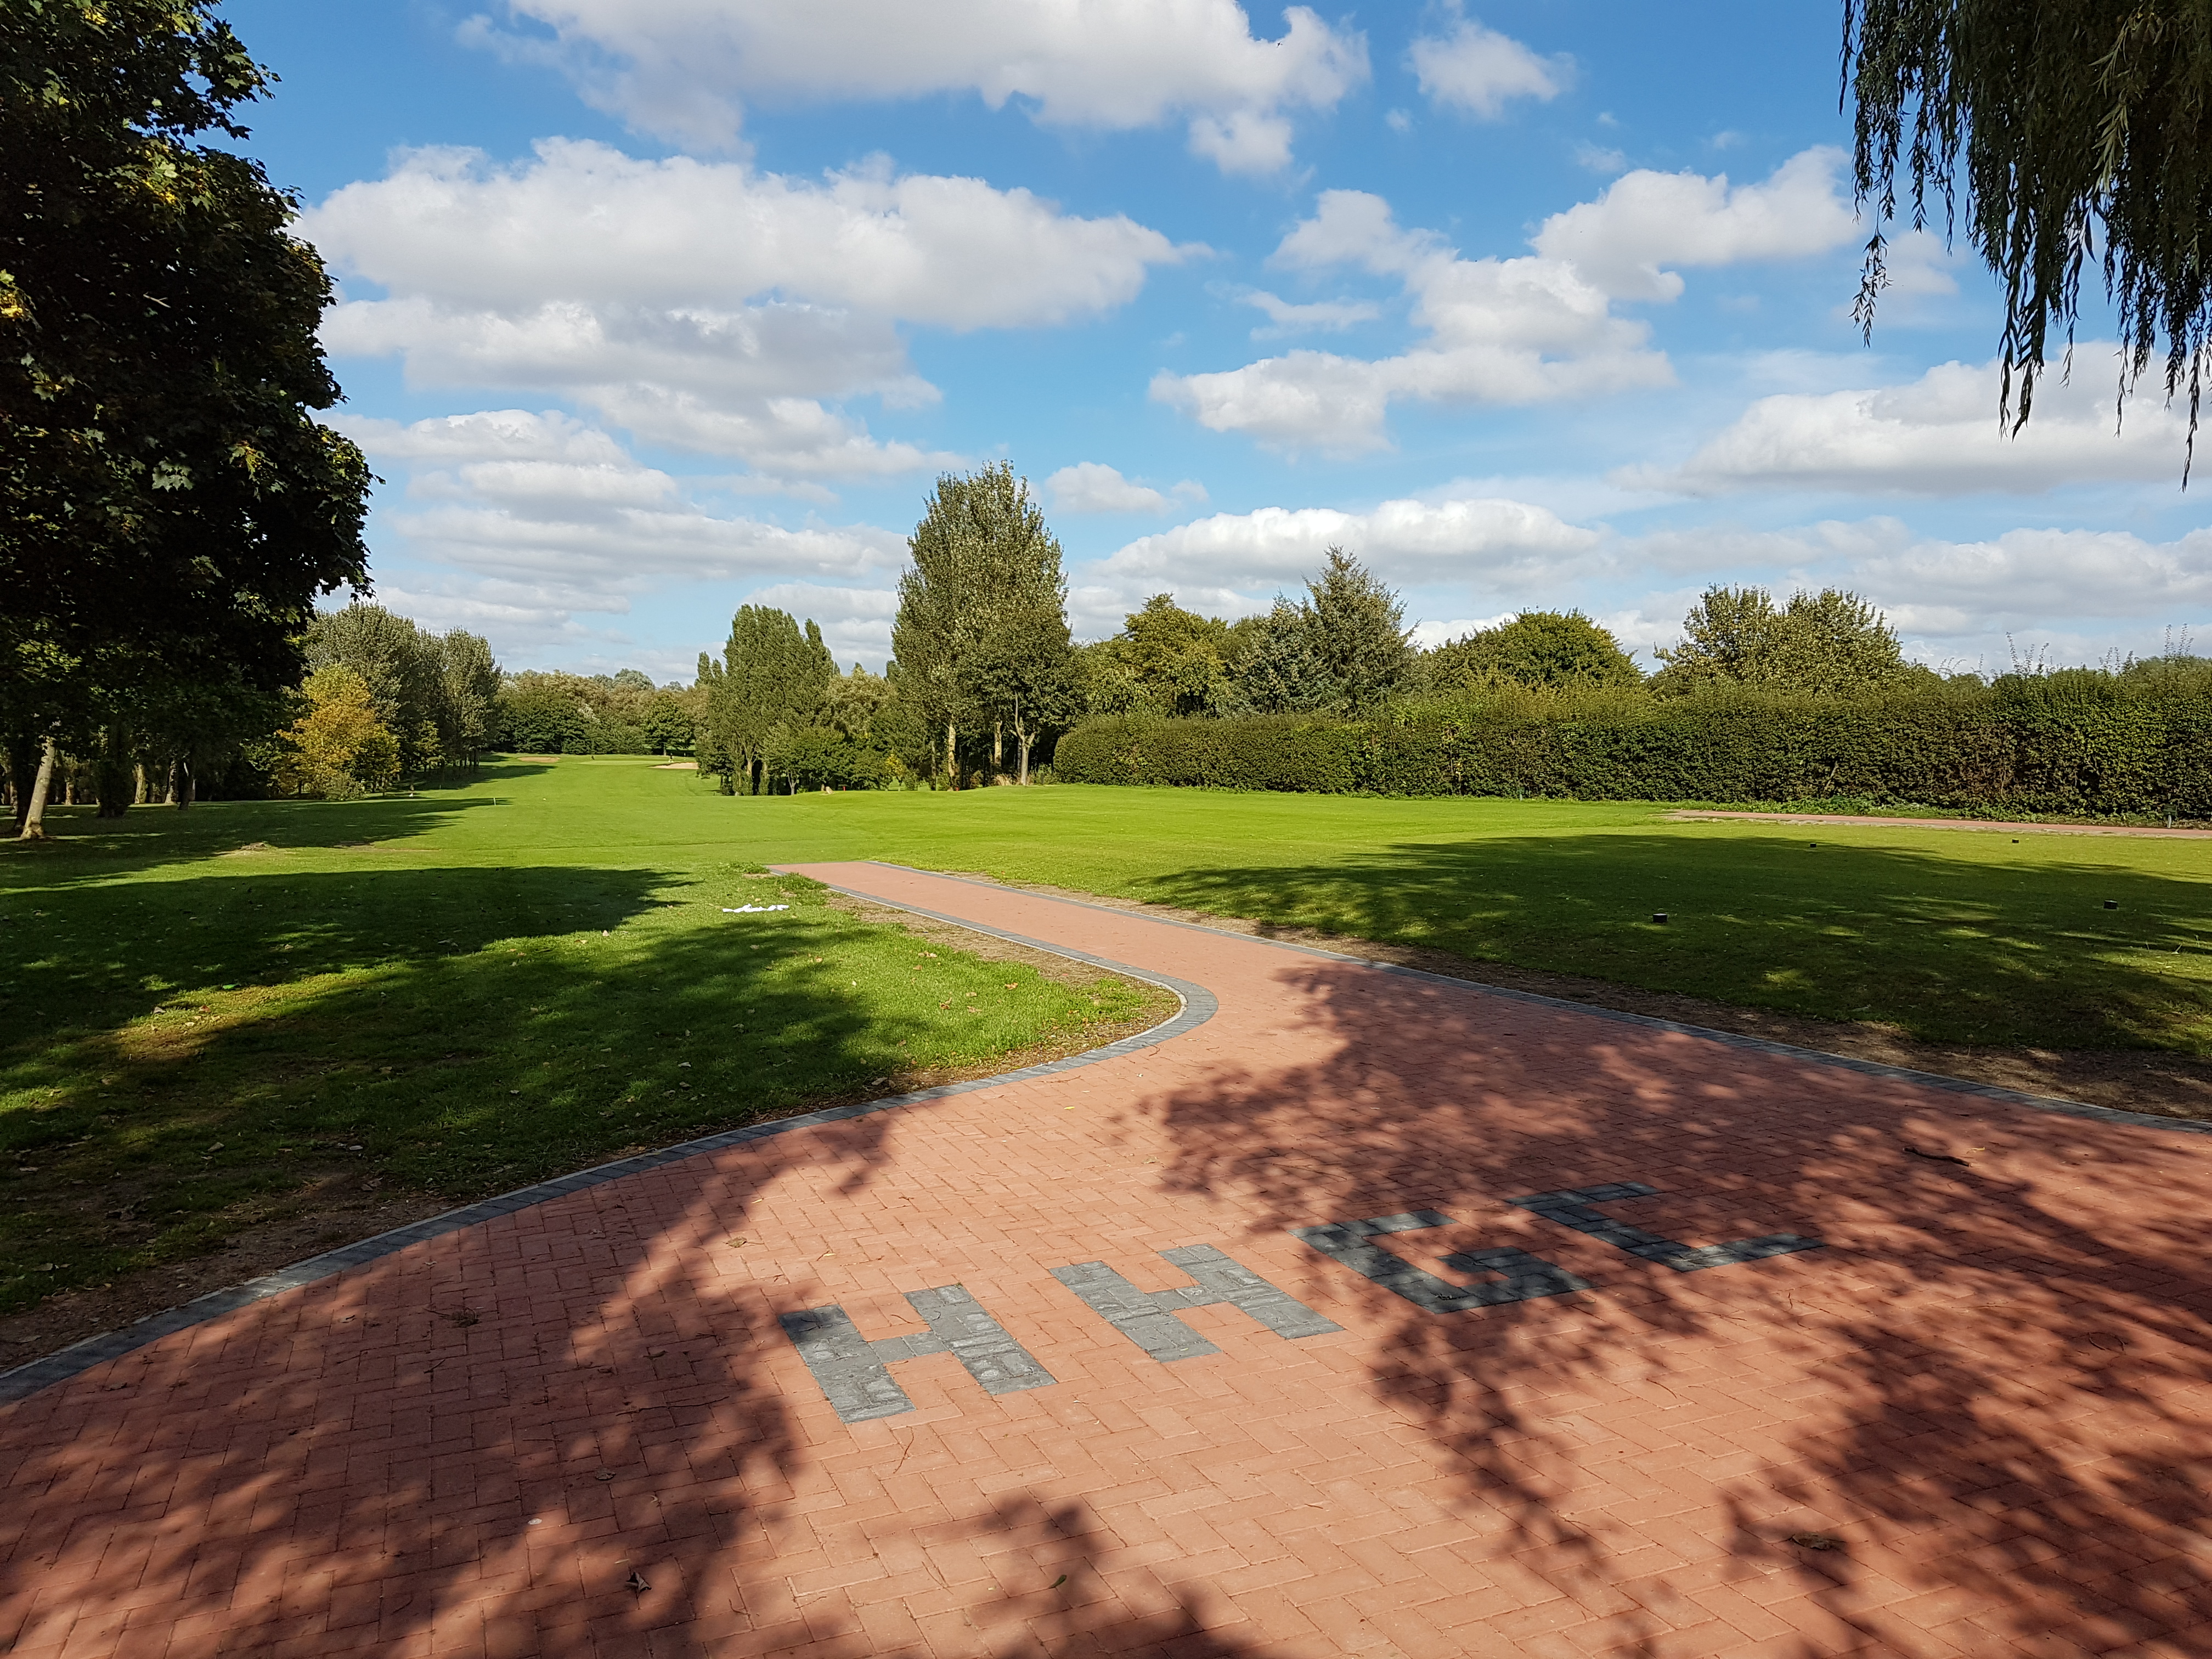 Hole 1: Page's Pride


The 1st hole is a 363 yard par 4. On the tee the fairway looks wide and straight, but with ditches to the left and right as well as water 200 yards off the tee box getting your club selection right and just left of centre will give you the best approach to the green.